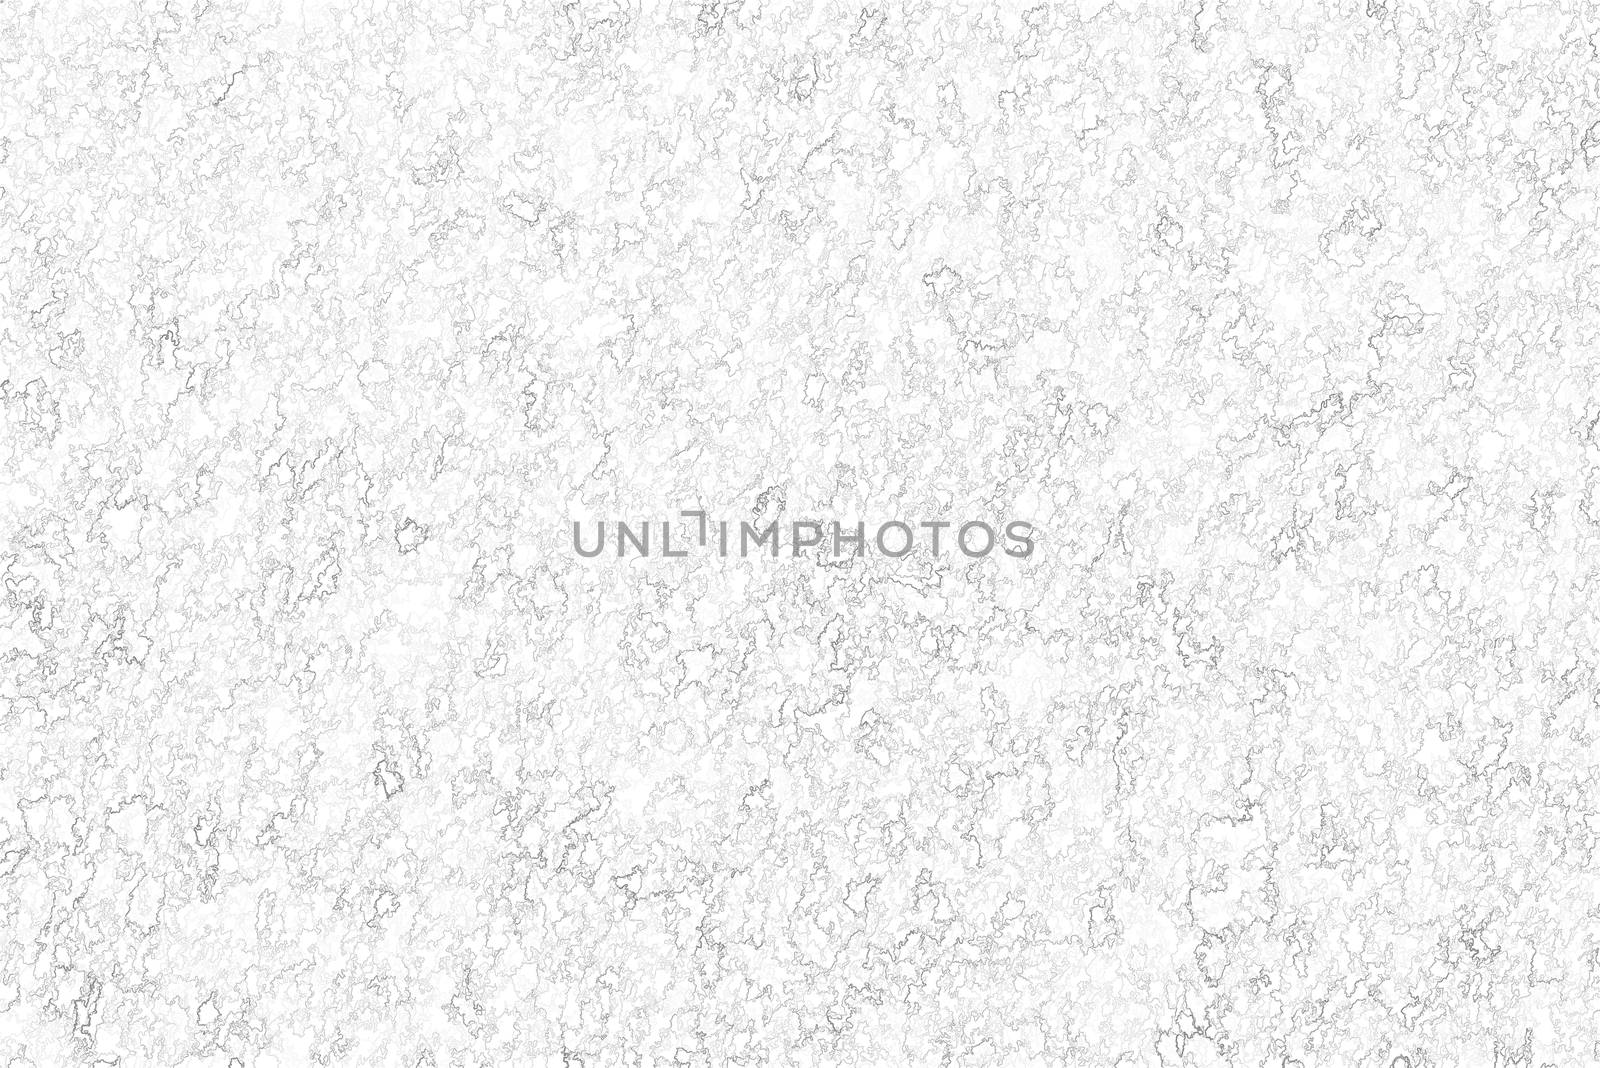 Texture of decorative surface. Marble pattern texture background